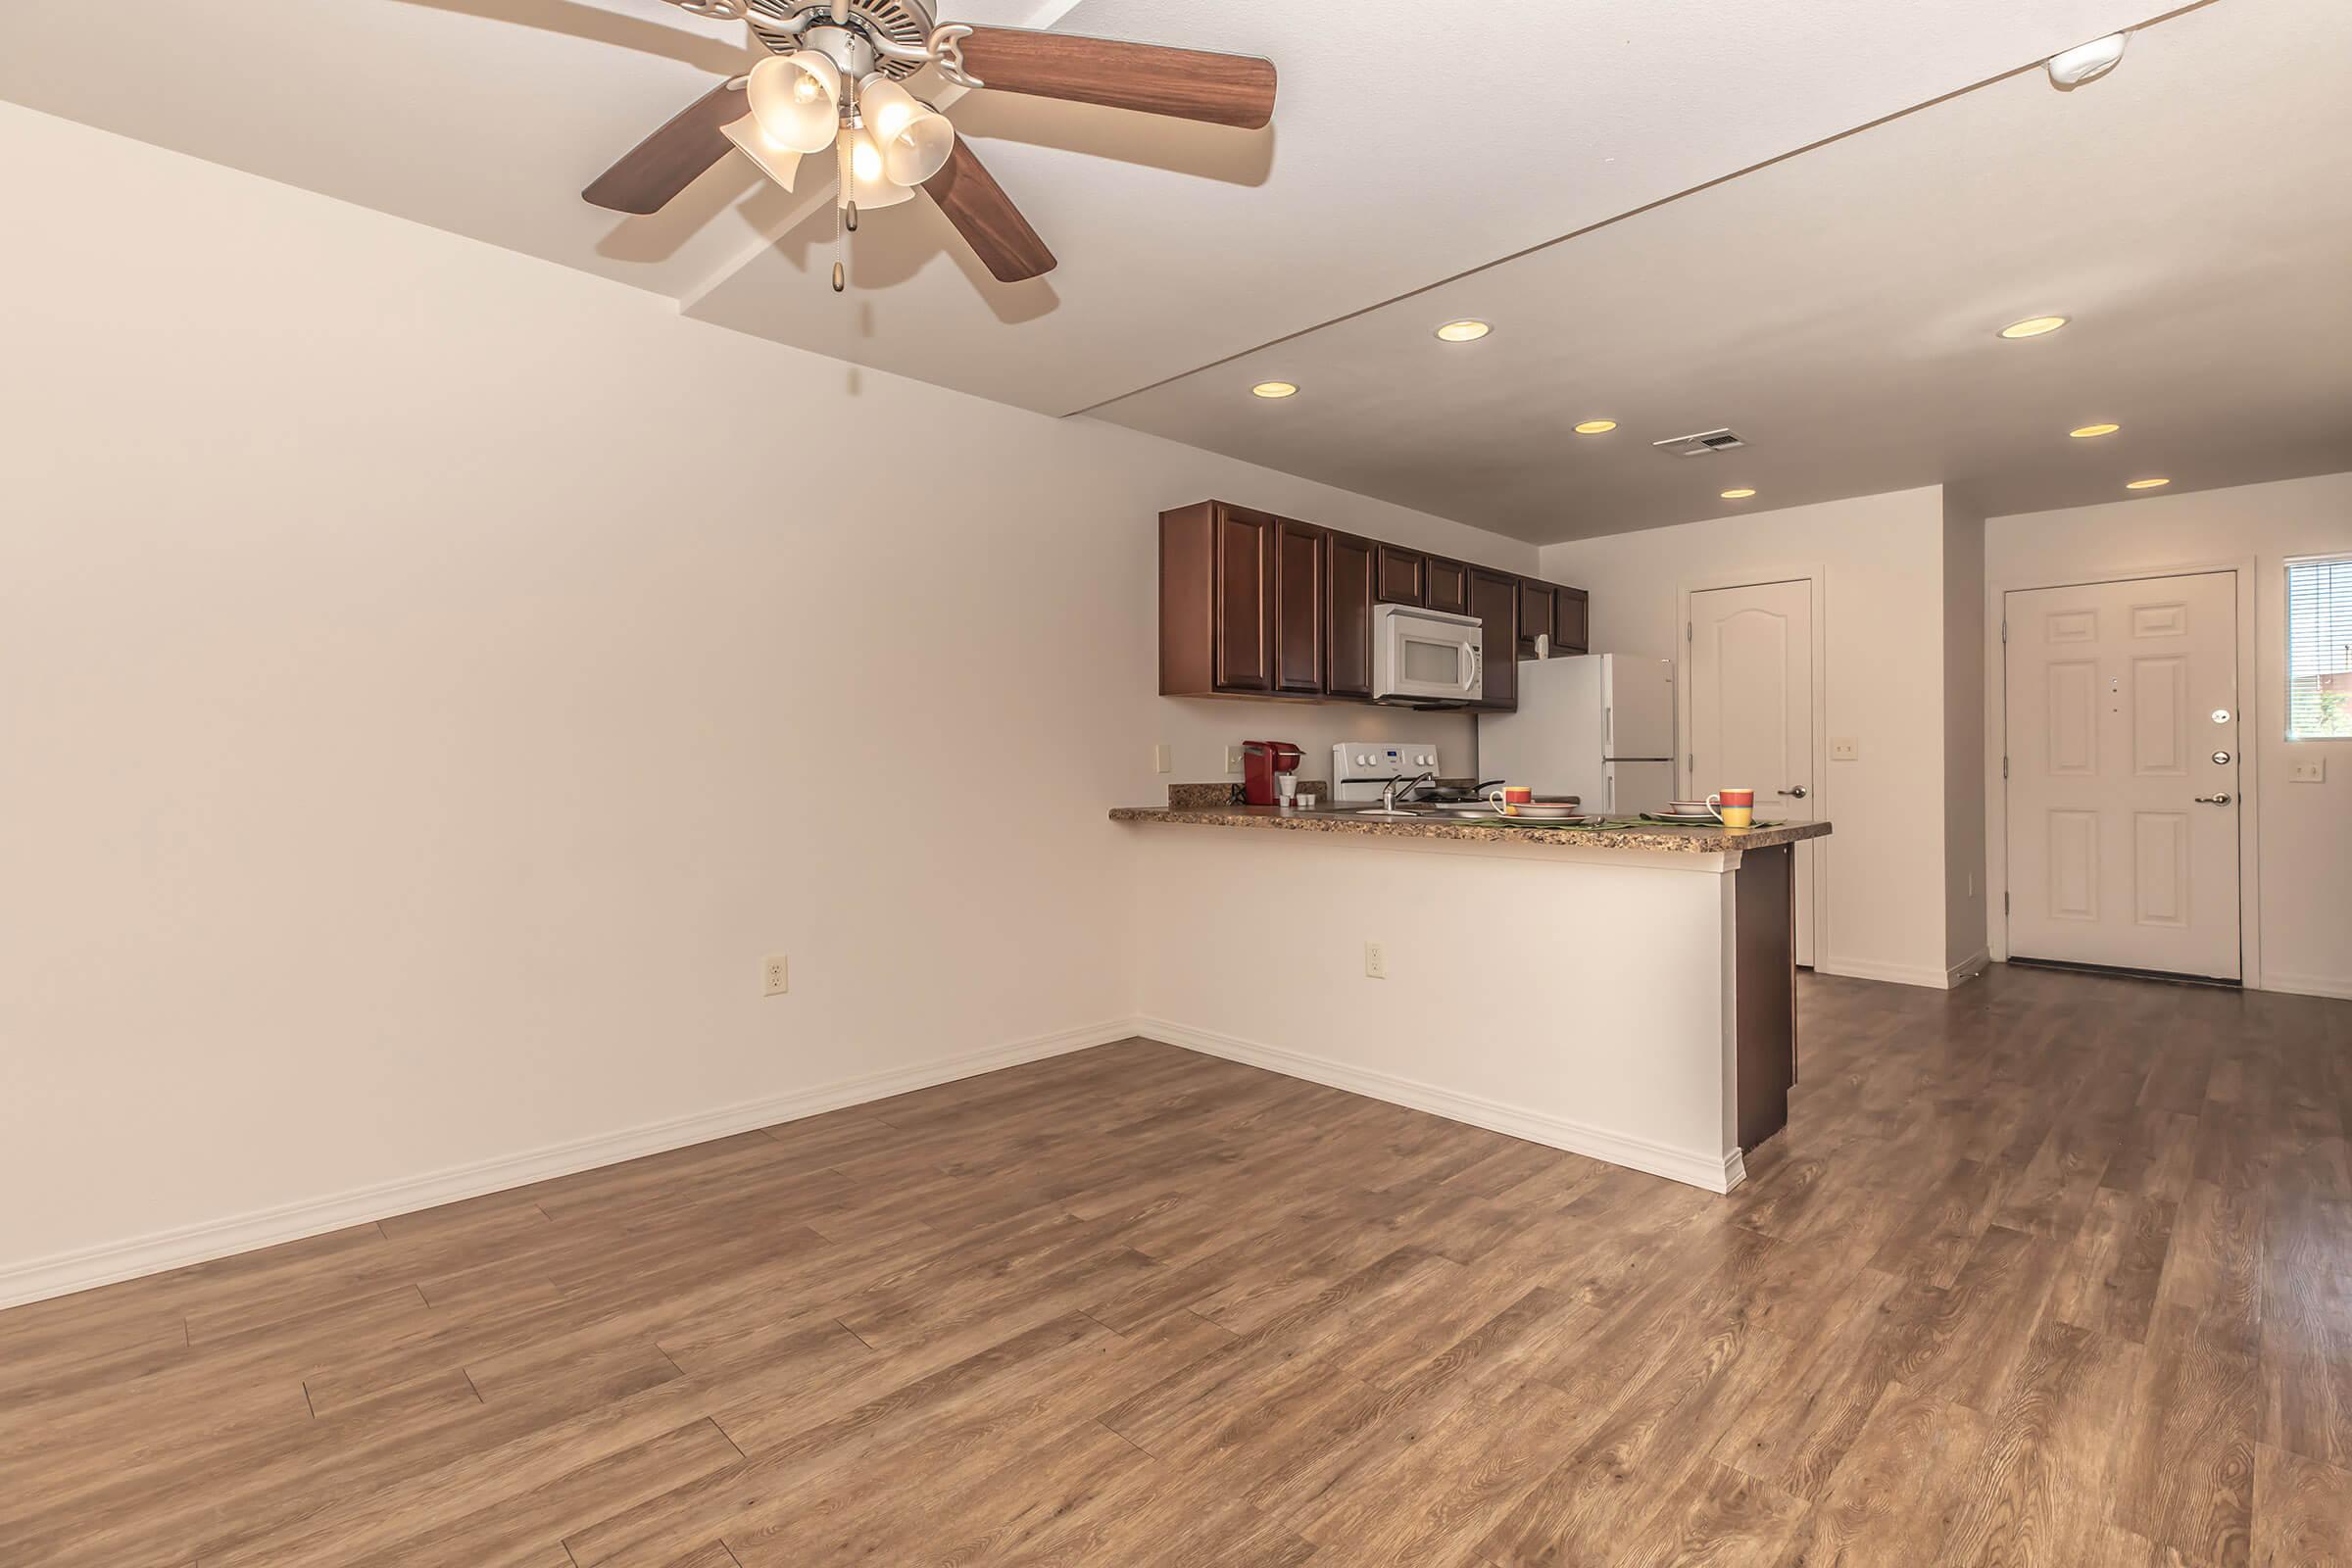 TWO BEDROOM HOMES FOR RENT IN EL PASO, TX